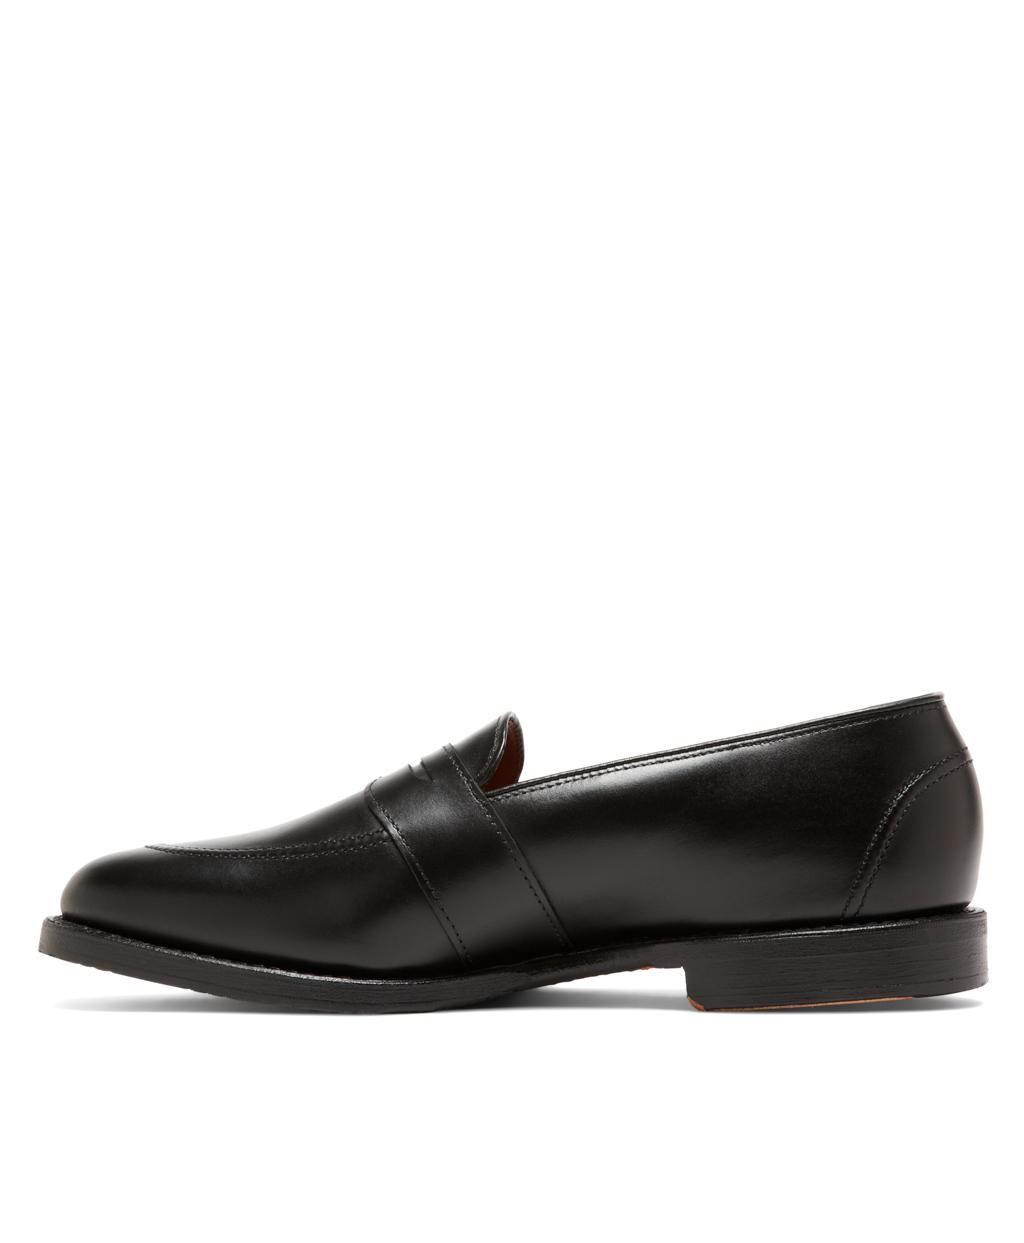 Brooks Brothers Leather Low Vamp Penny Loafers in Black for Men - Lyst